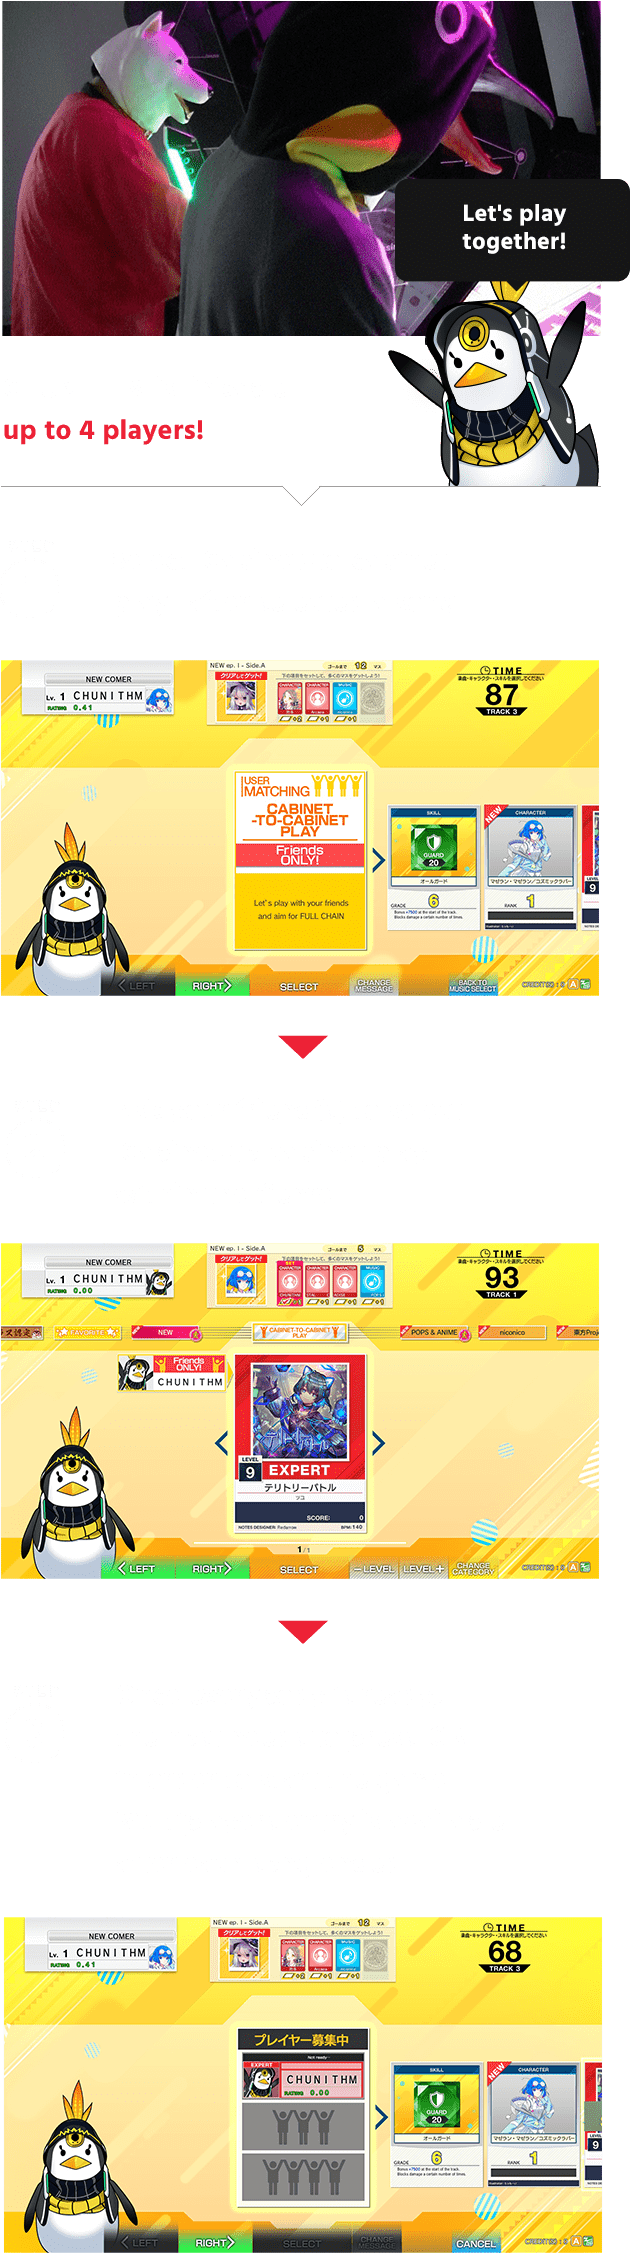 CHUNITHM is linkable
                  up to 4 players!
                  Select 'Cabinet-to-cabinet play ' after selected a song!
                  Ask your friend(s) to select 'Cabinet-to-cabinet play' within the Genre!
                  Once everybody is ready, the host needs to press 'OK' in order to start the game!
                  Multiplayers entry is available after each song ended!